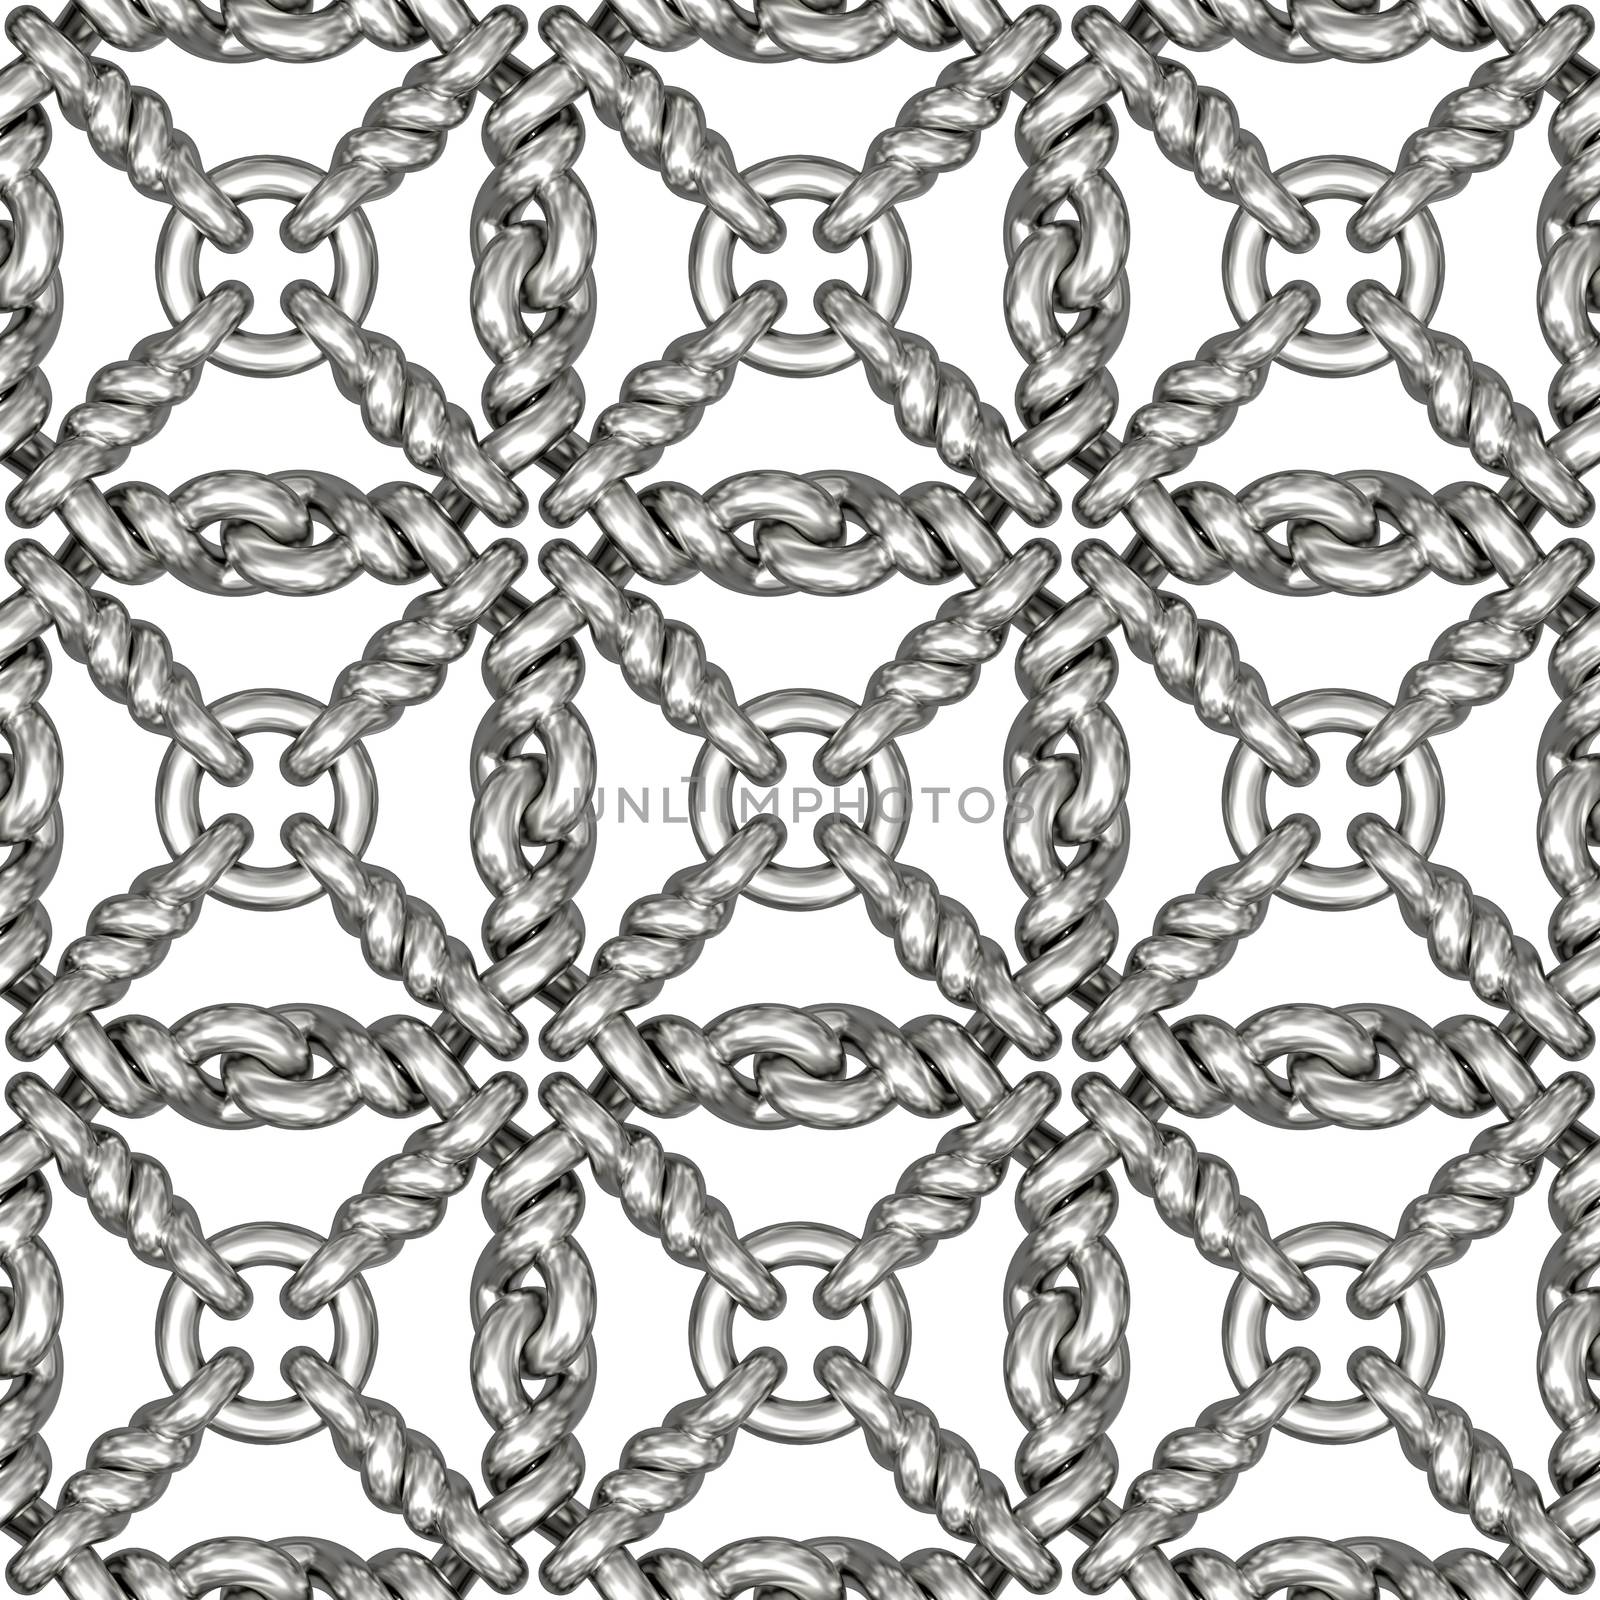 Seamless pattern of silver wire mesh or fence on white background. High resolution 3D image